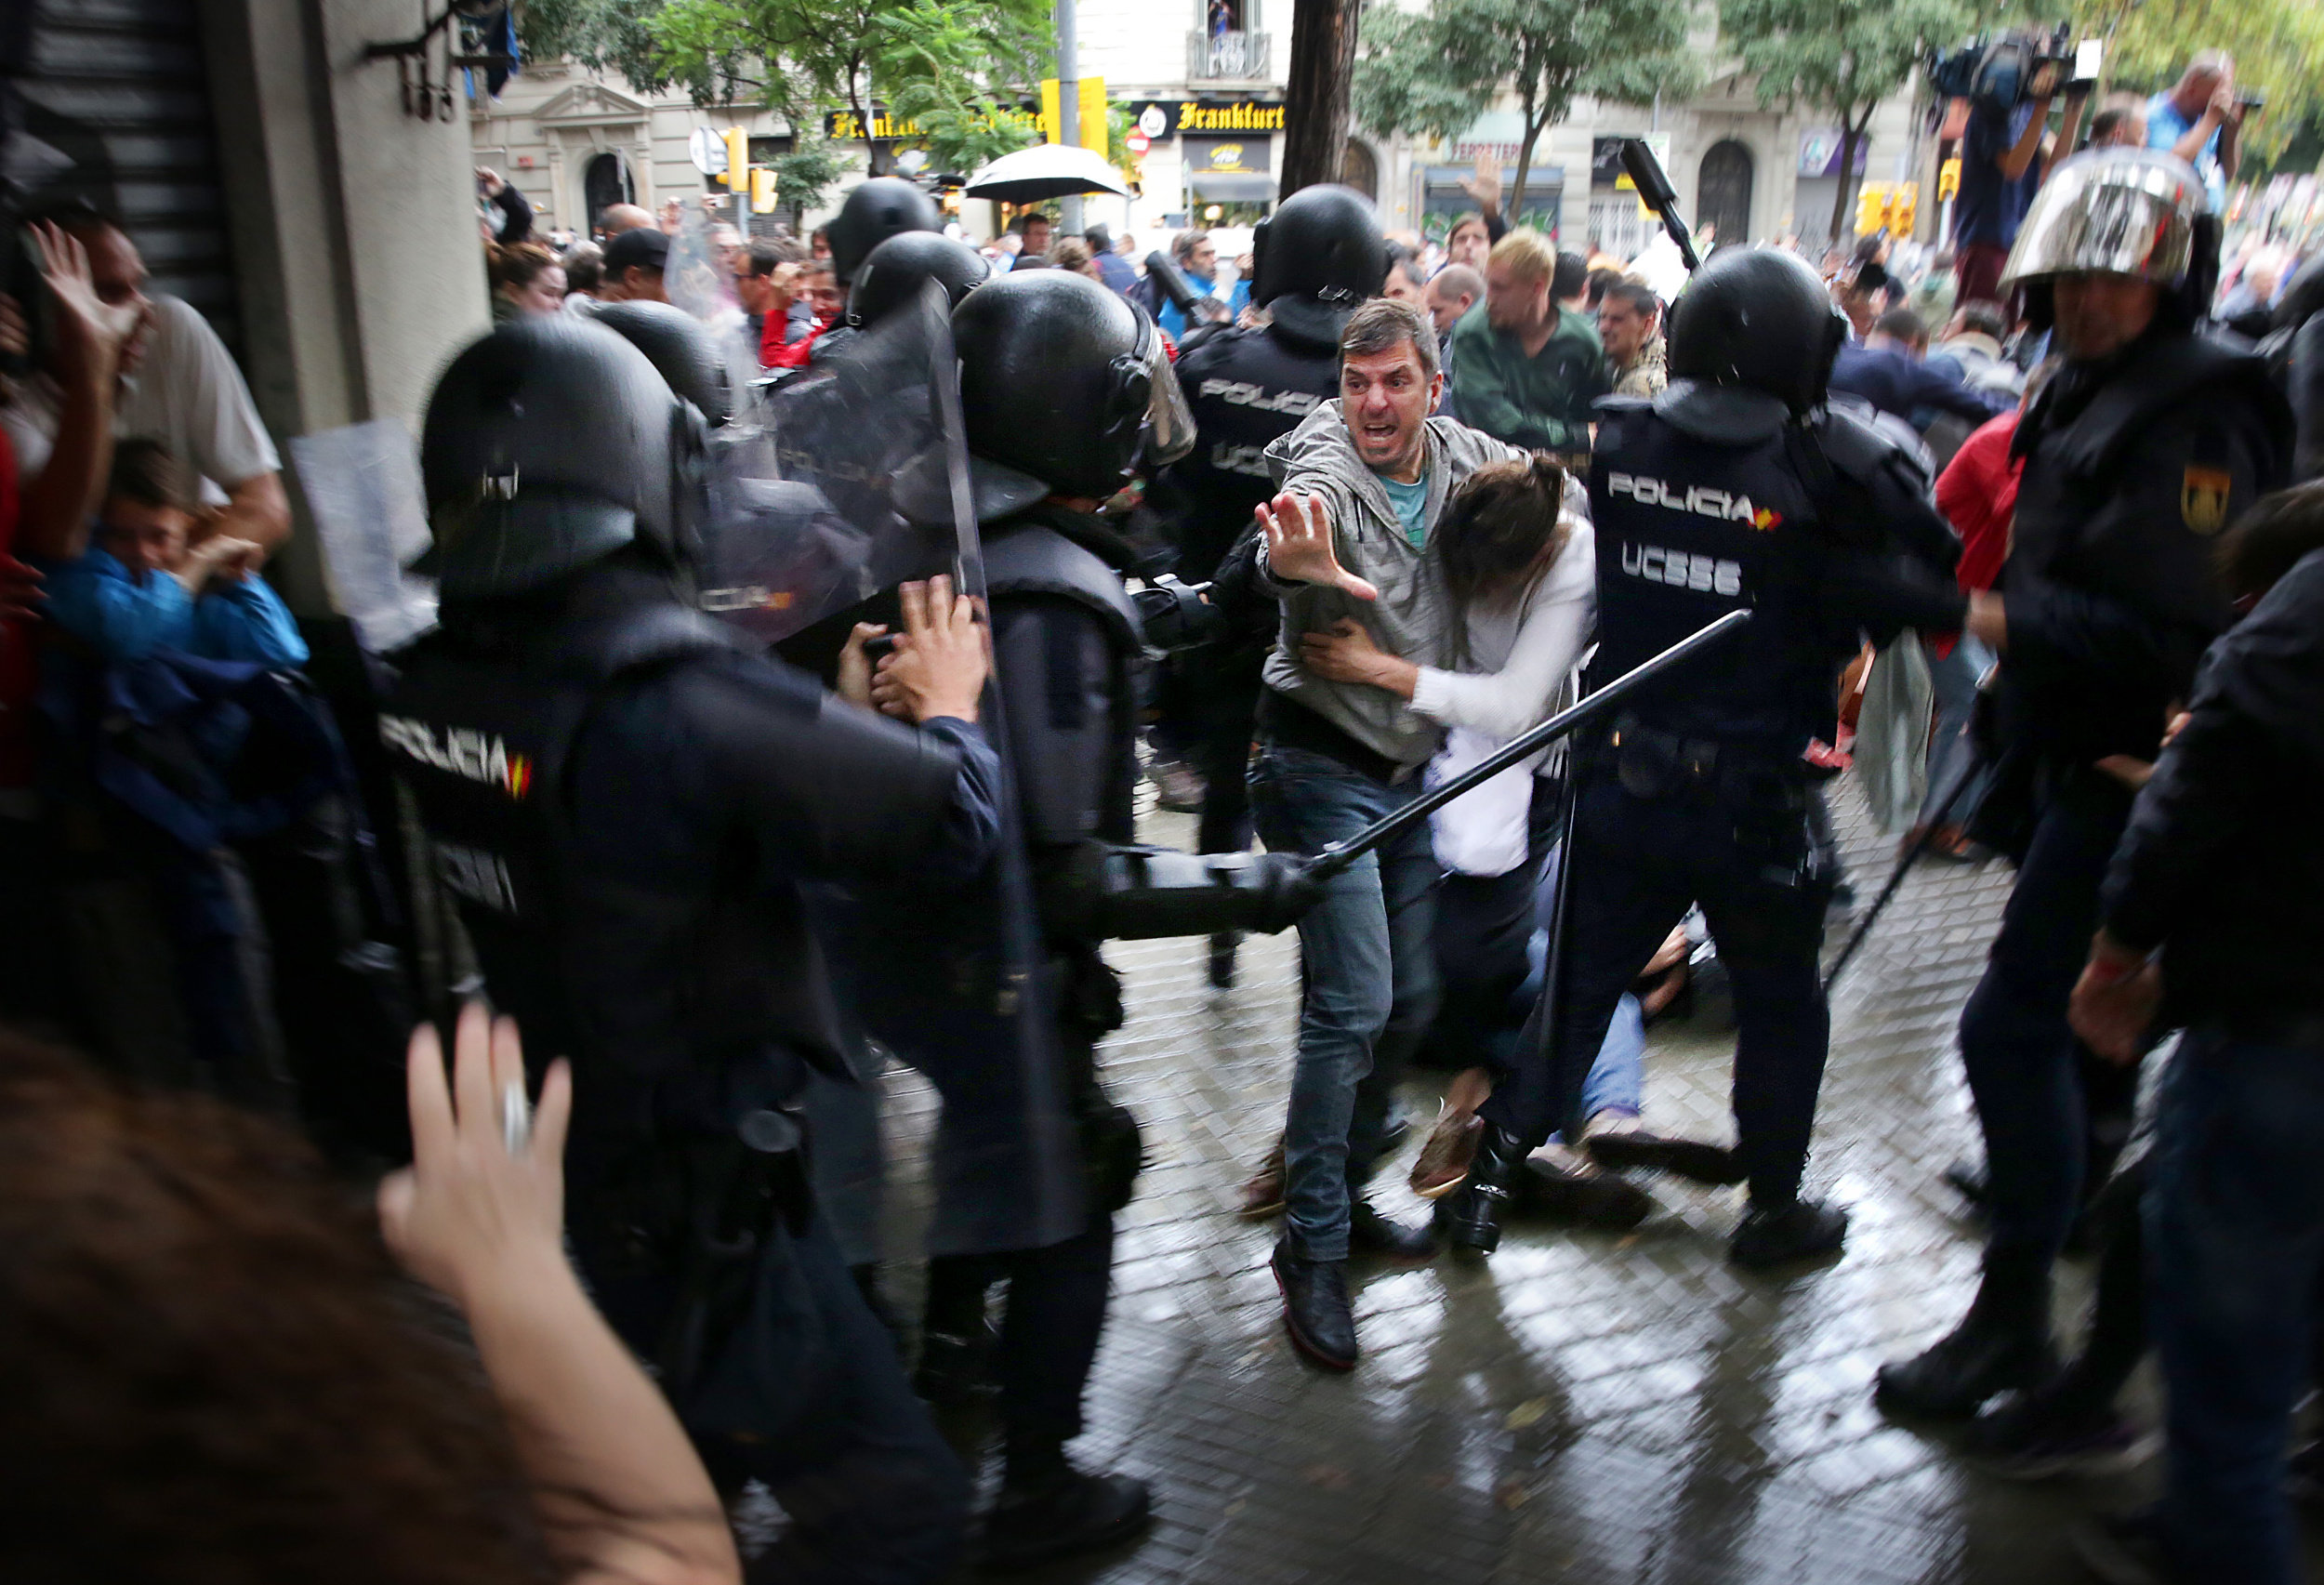 A man shields a woman from the police in Barcelona outside of an independence referendum polling station (by Jordi Play)